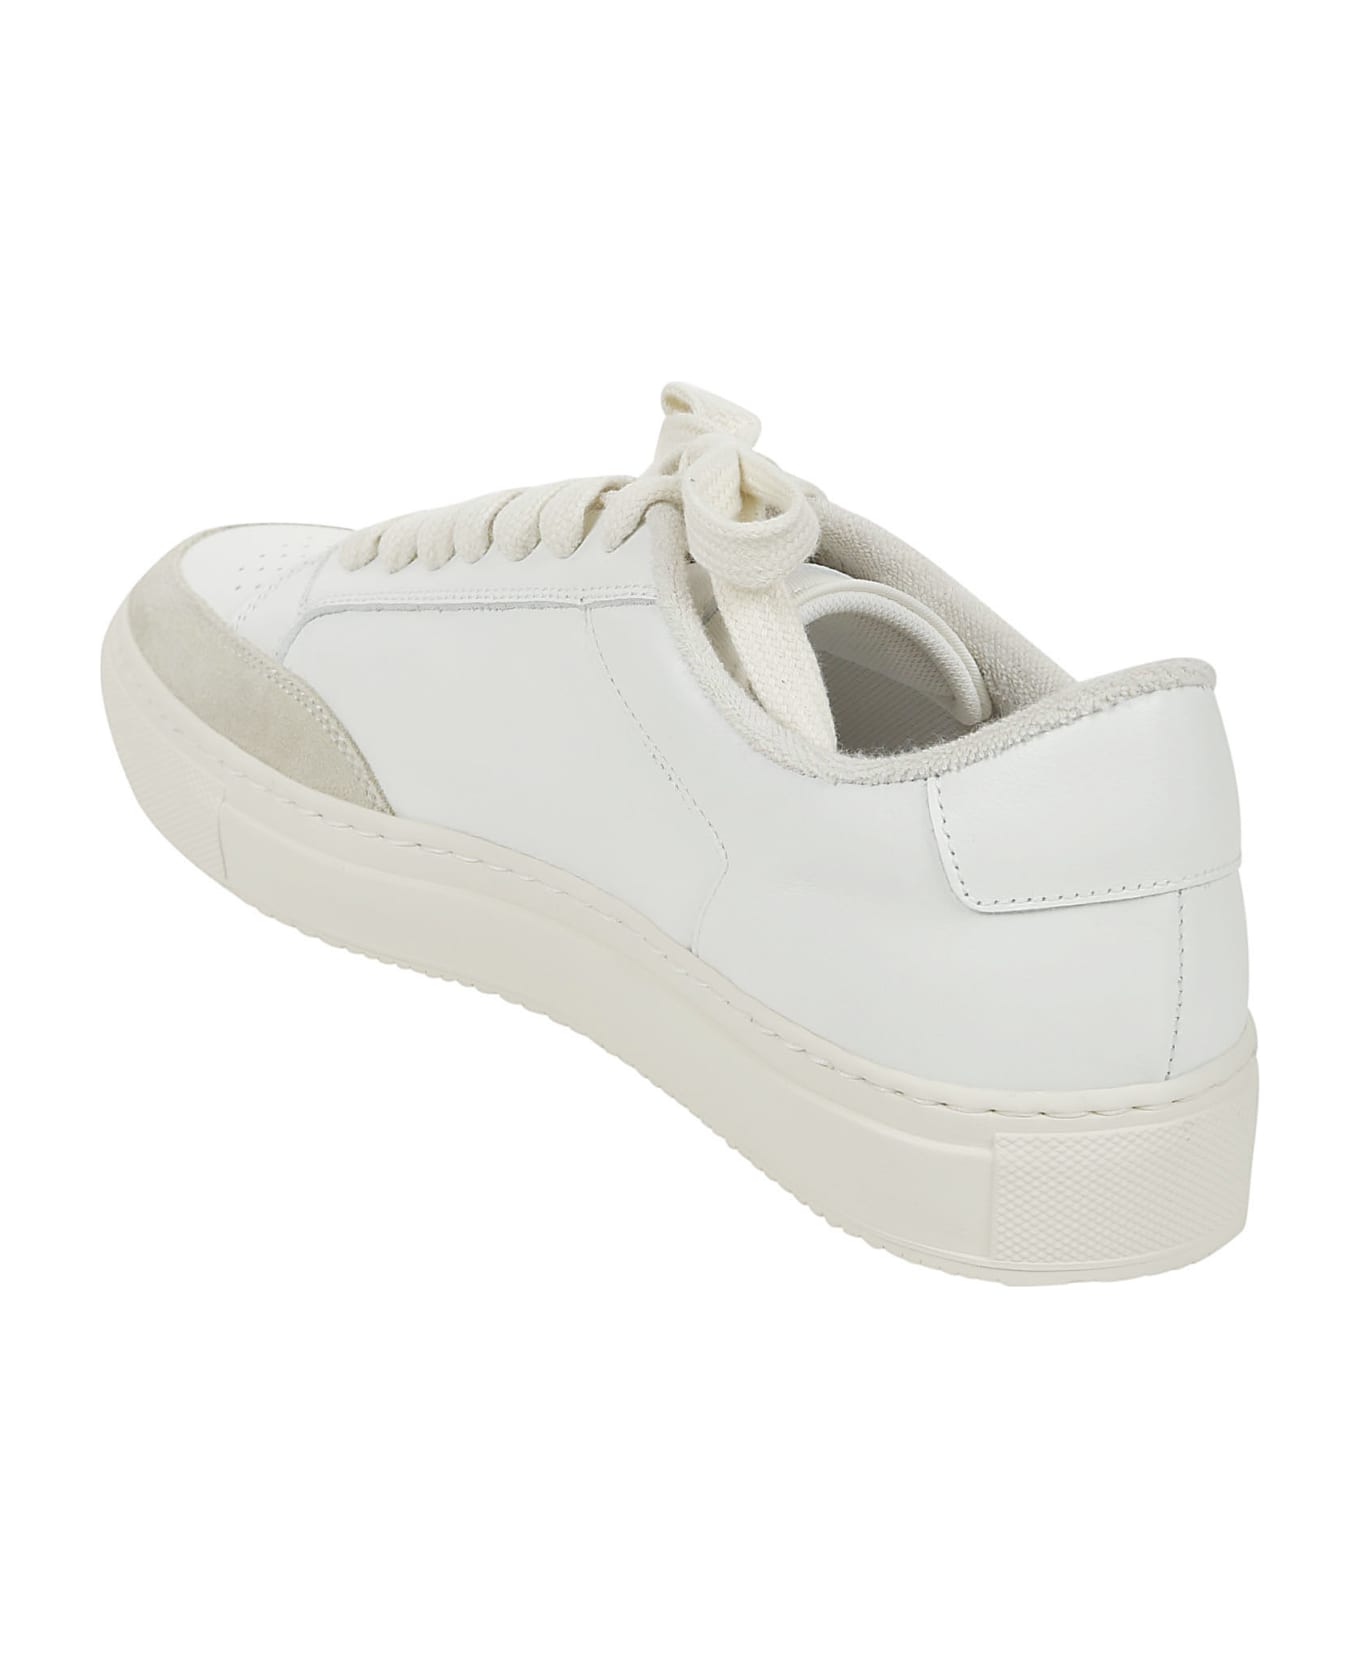 Common Projects Tennis Pro - White